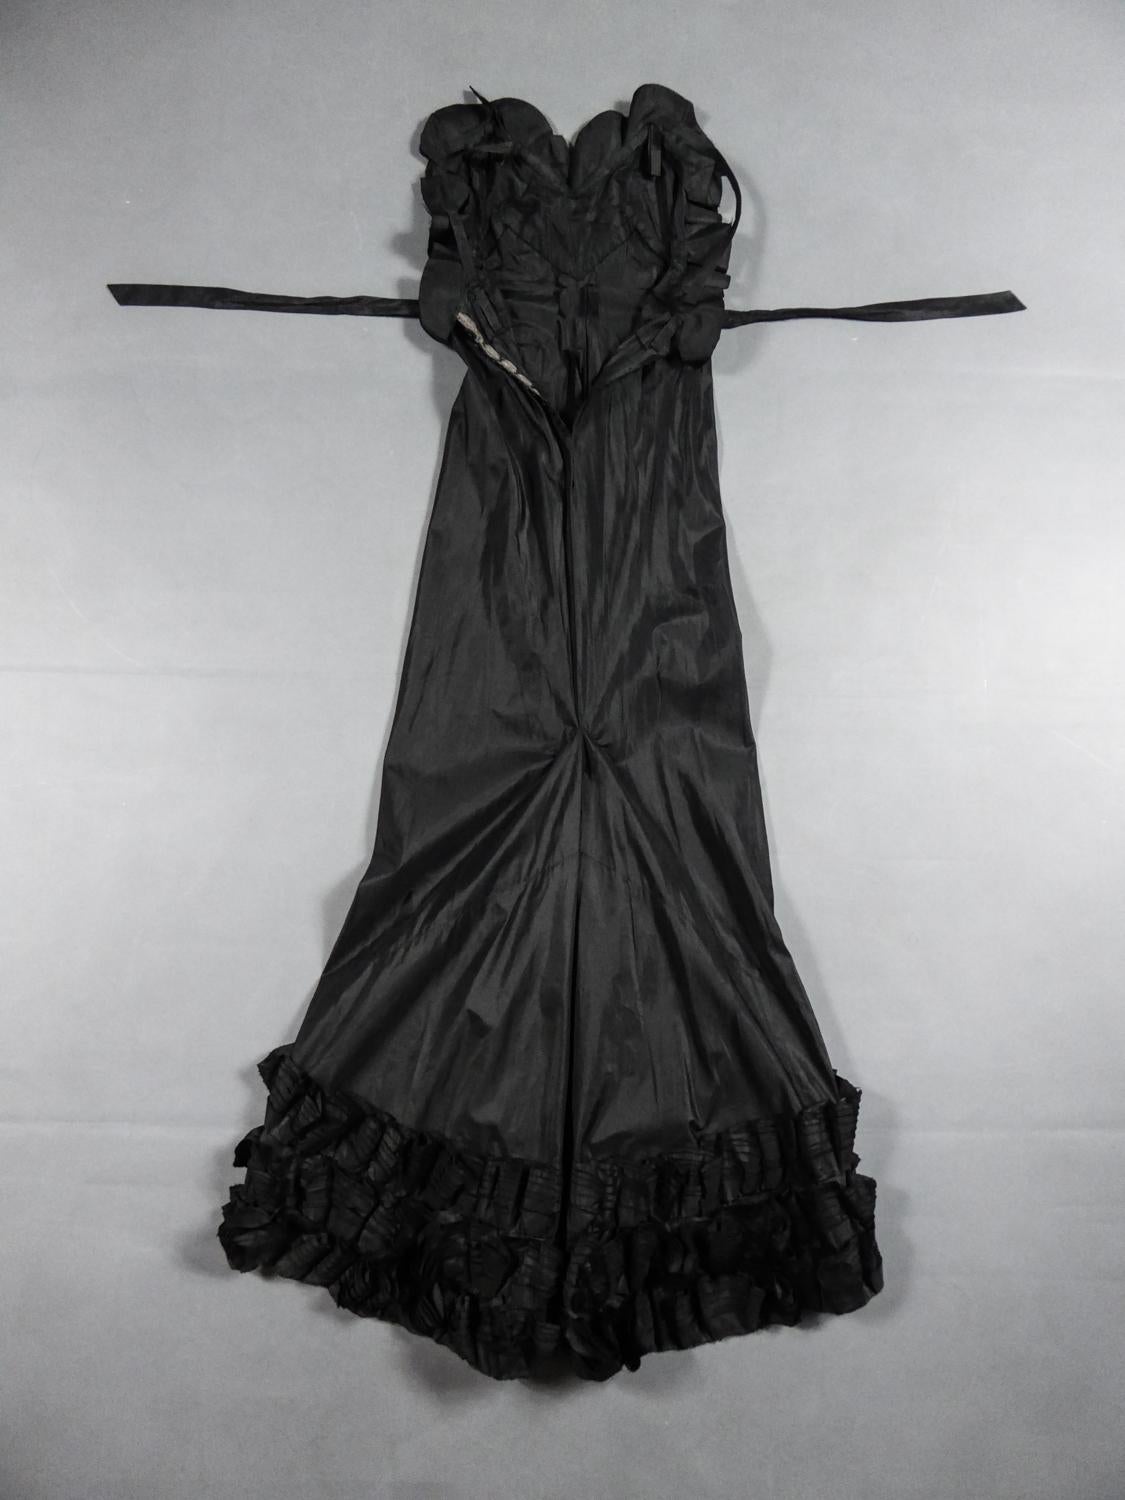 Circa 1935
France

Amazing evening dress with train in black silk taffeta from a Parisian wardrobe mainly made up of Jean-Charles Worth Haute Couture Dress Circa 1935. Generous long dress with V-shaped backless and thin straps. Buttoned at the back